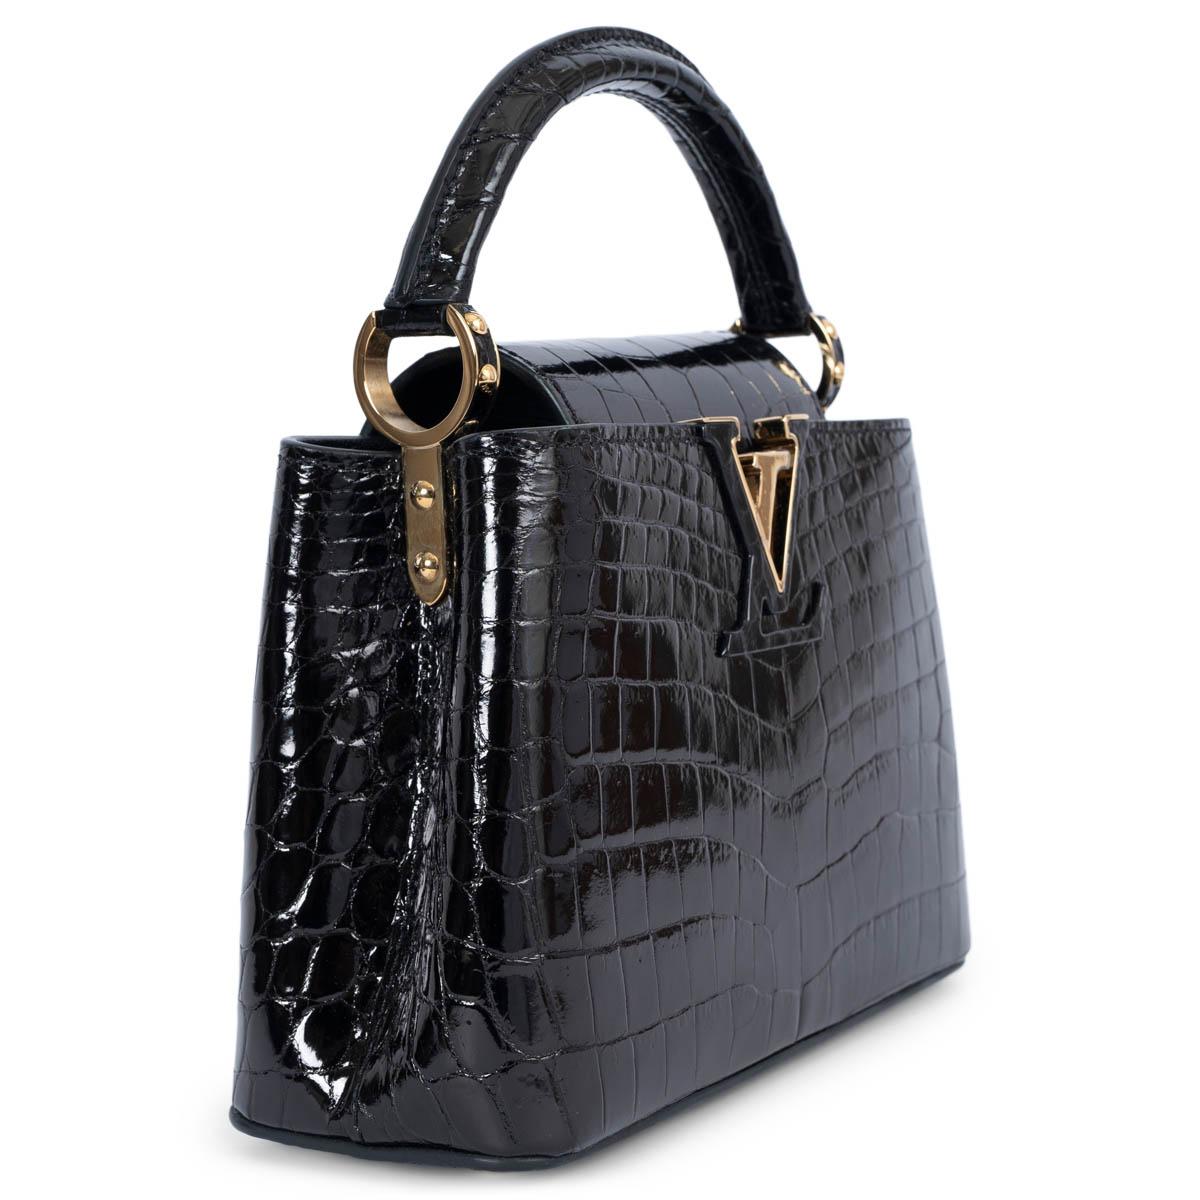 100% authentic Louis Vuitton Capucines Mini Bag in dark brown Crocodilien Brillant is polished to a high-gloss finish with sparkling gold-tone metal hardware and sumptuous goatskin lining. The iconic Capucines flap can be worn outside to showcase